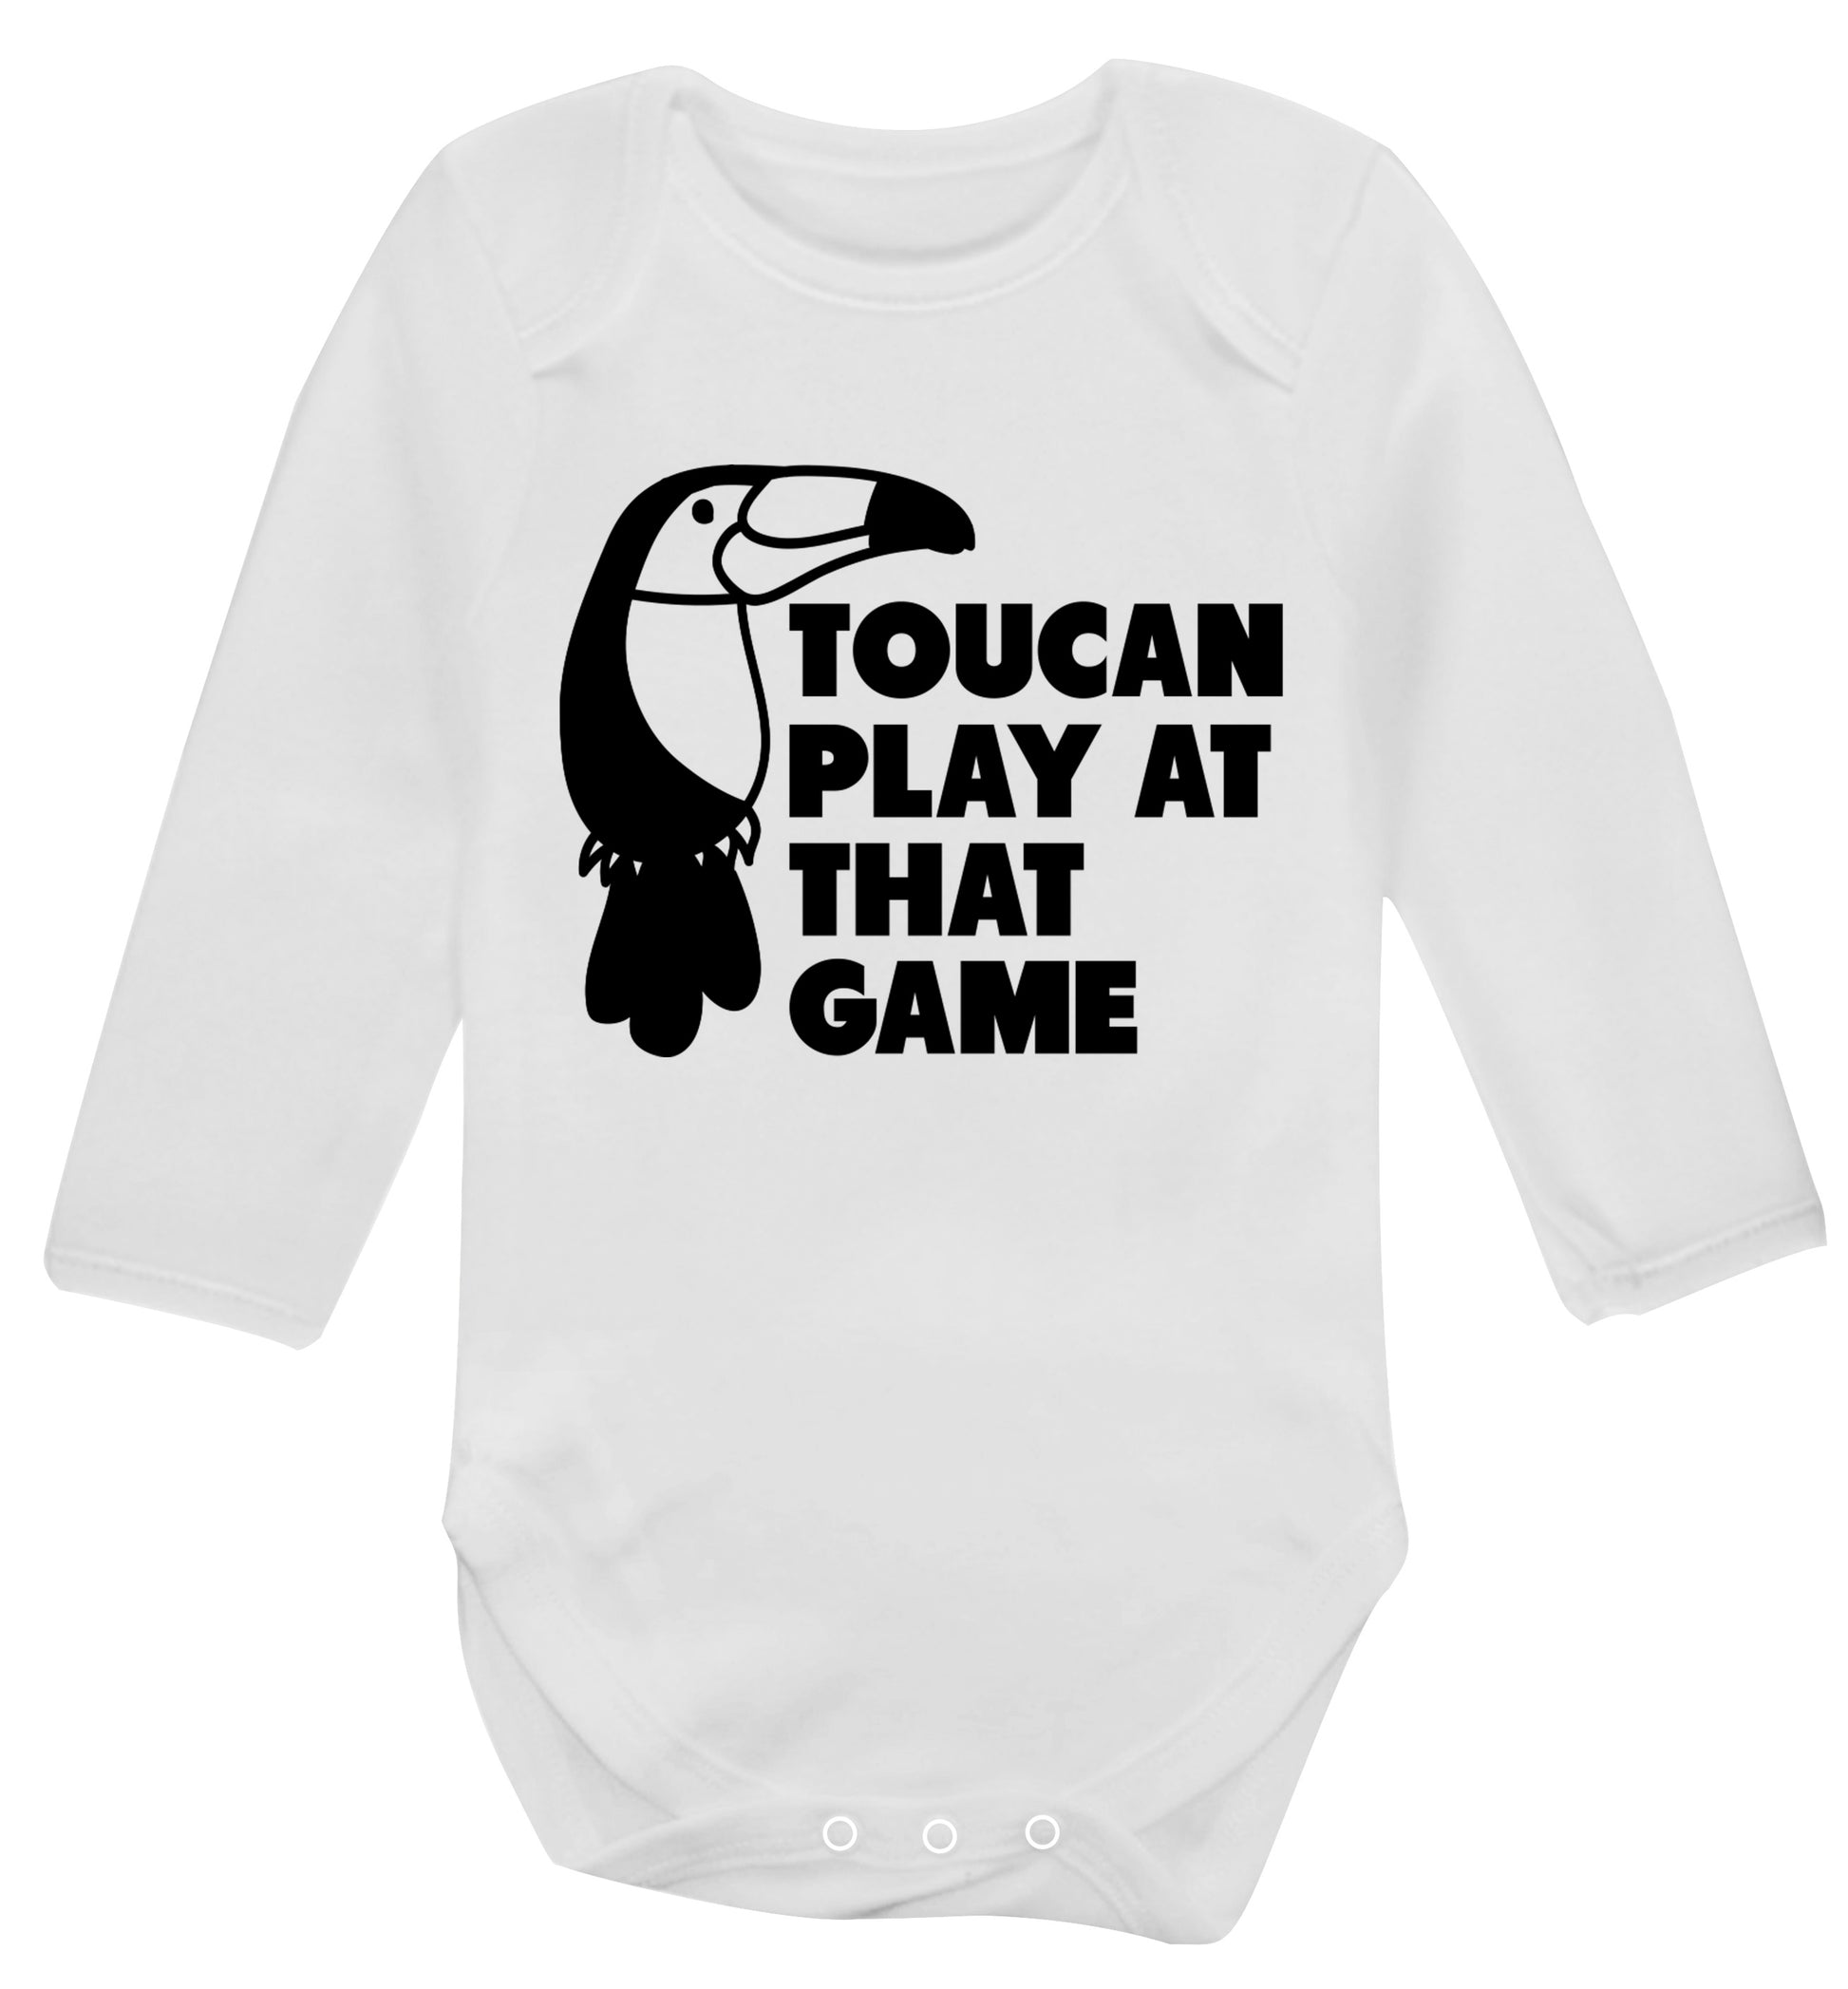 Toucan play at that game Baby Vest long sleeved white 6-12 months